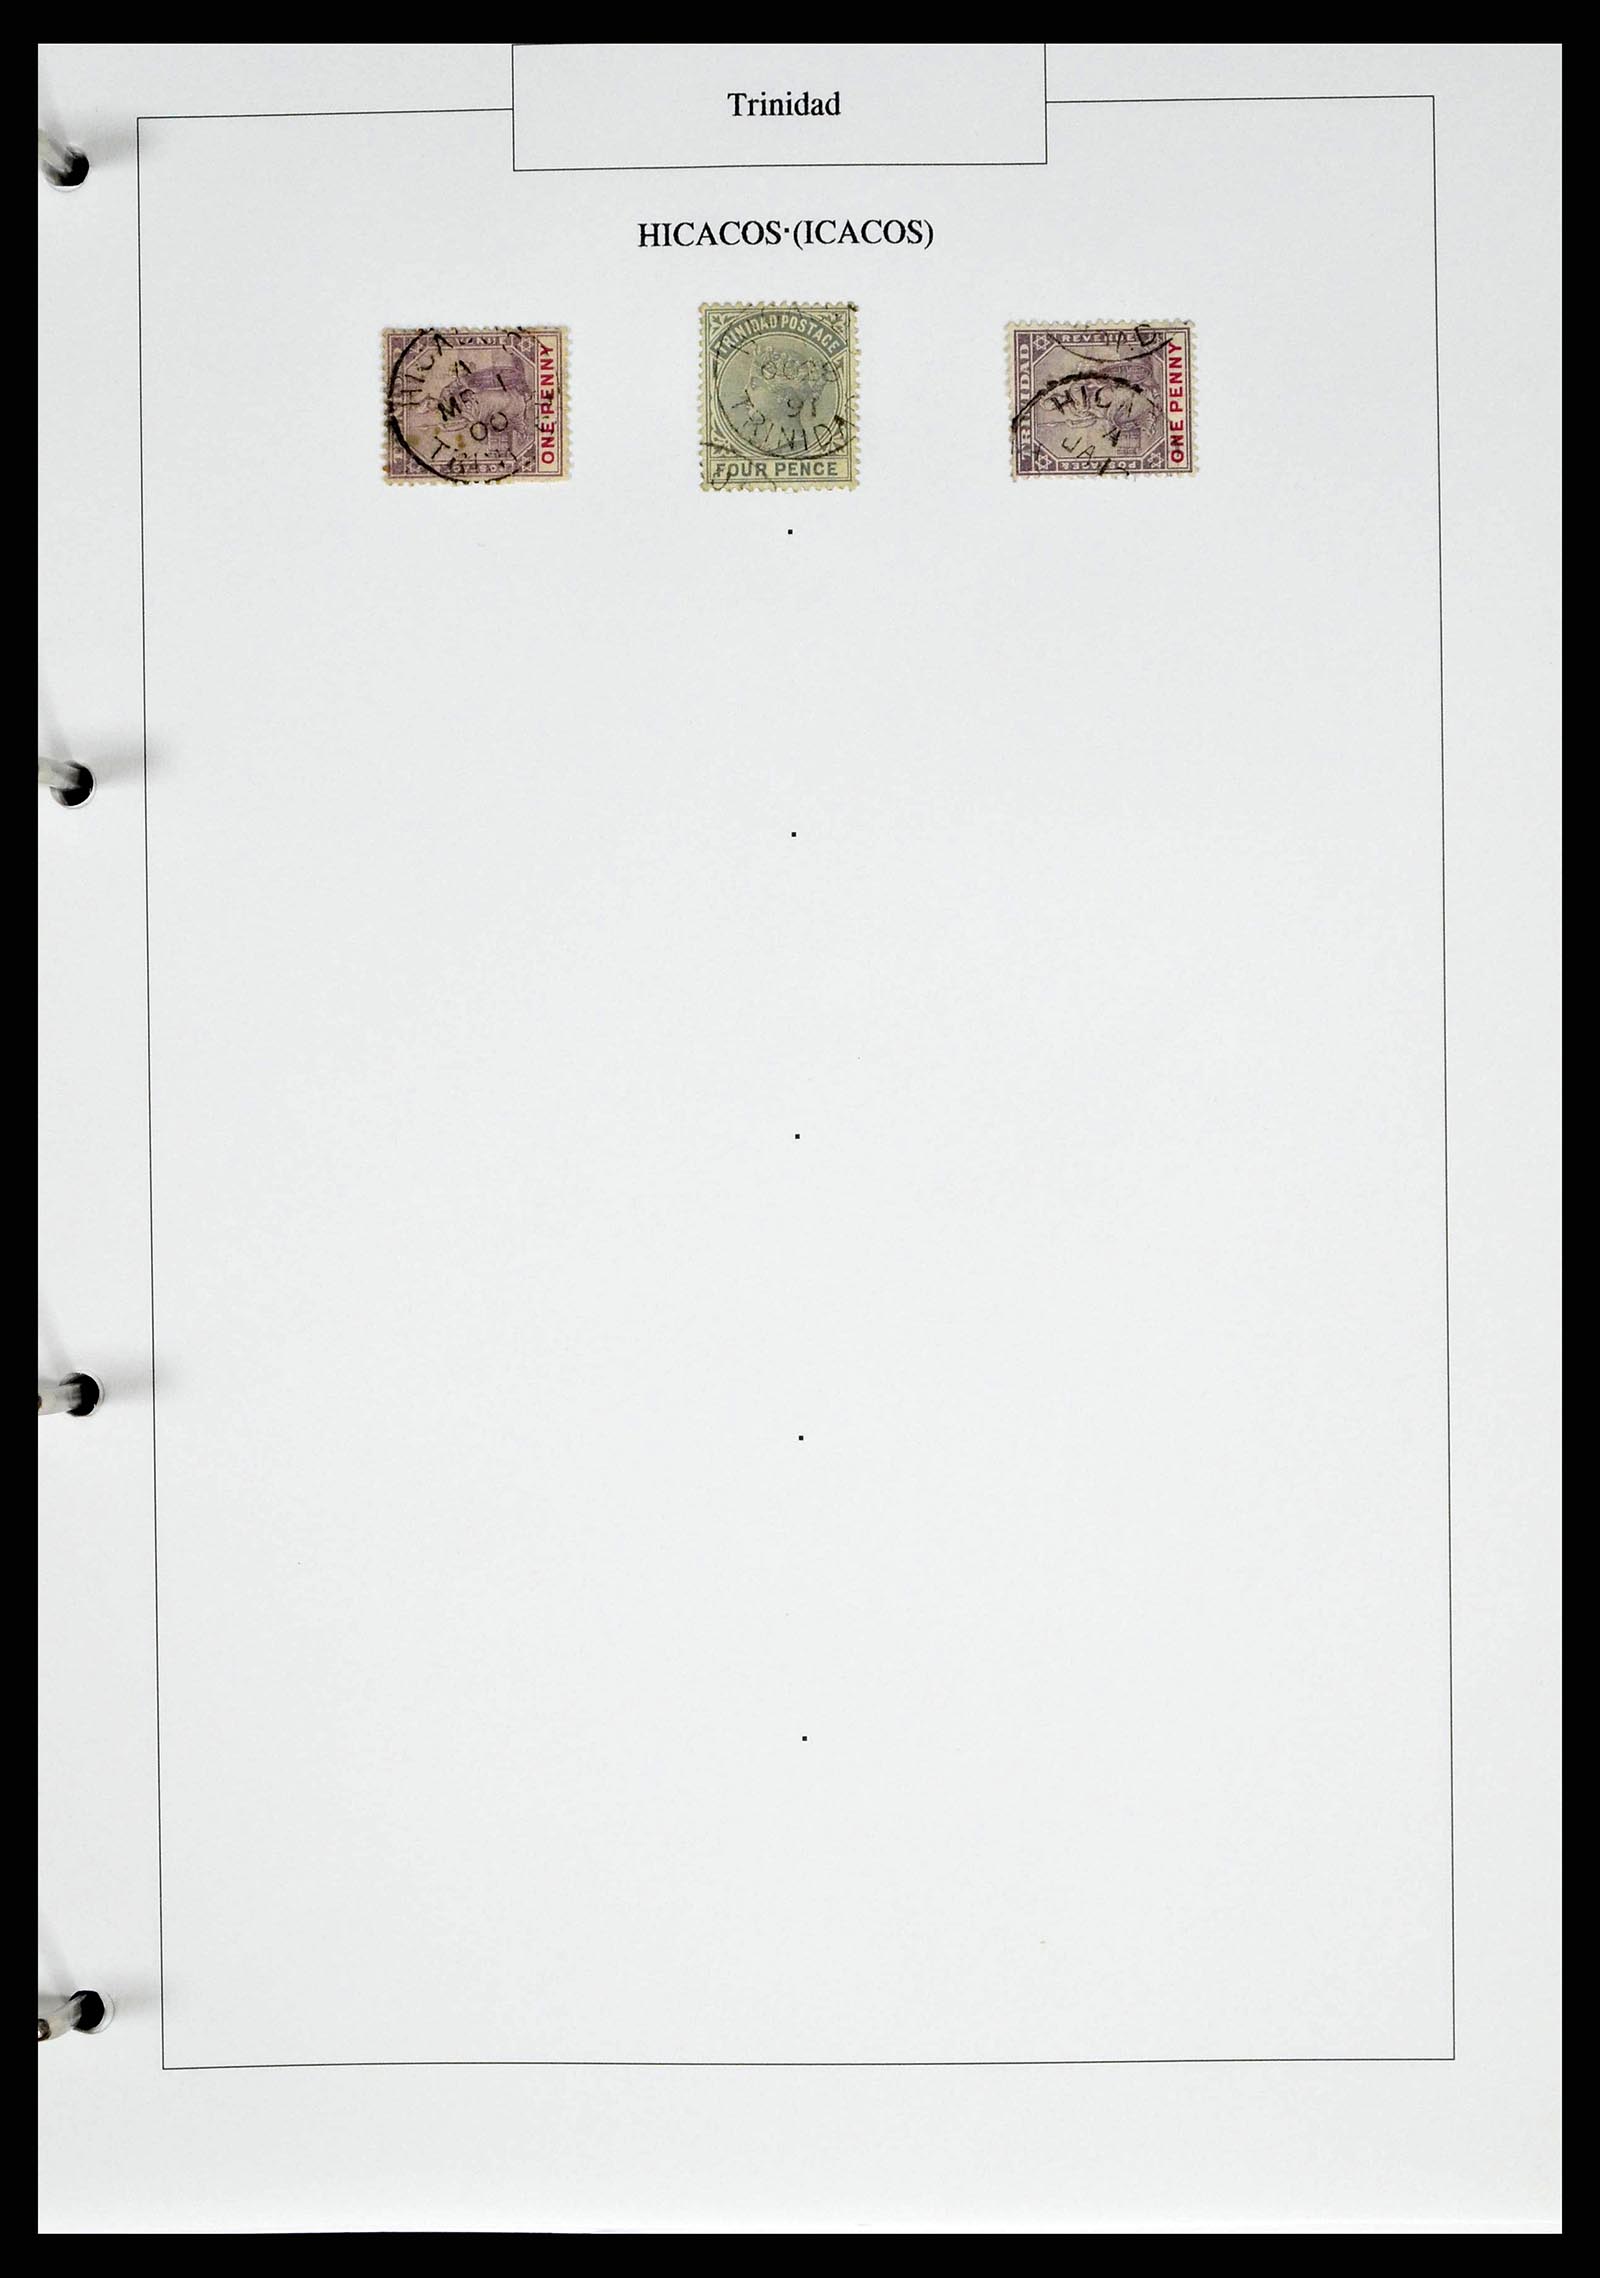 38481 0029 - Stamp collection 38481 Trinidad and Tobago cancels 1859-1960.